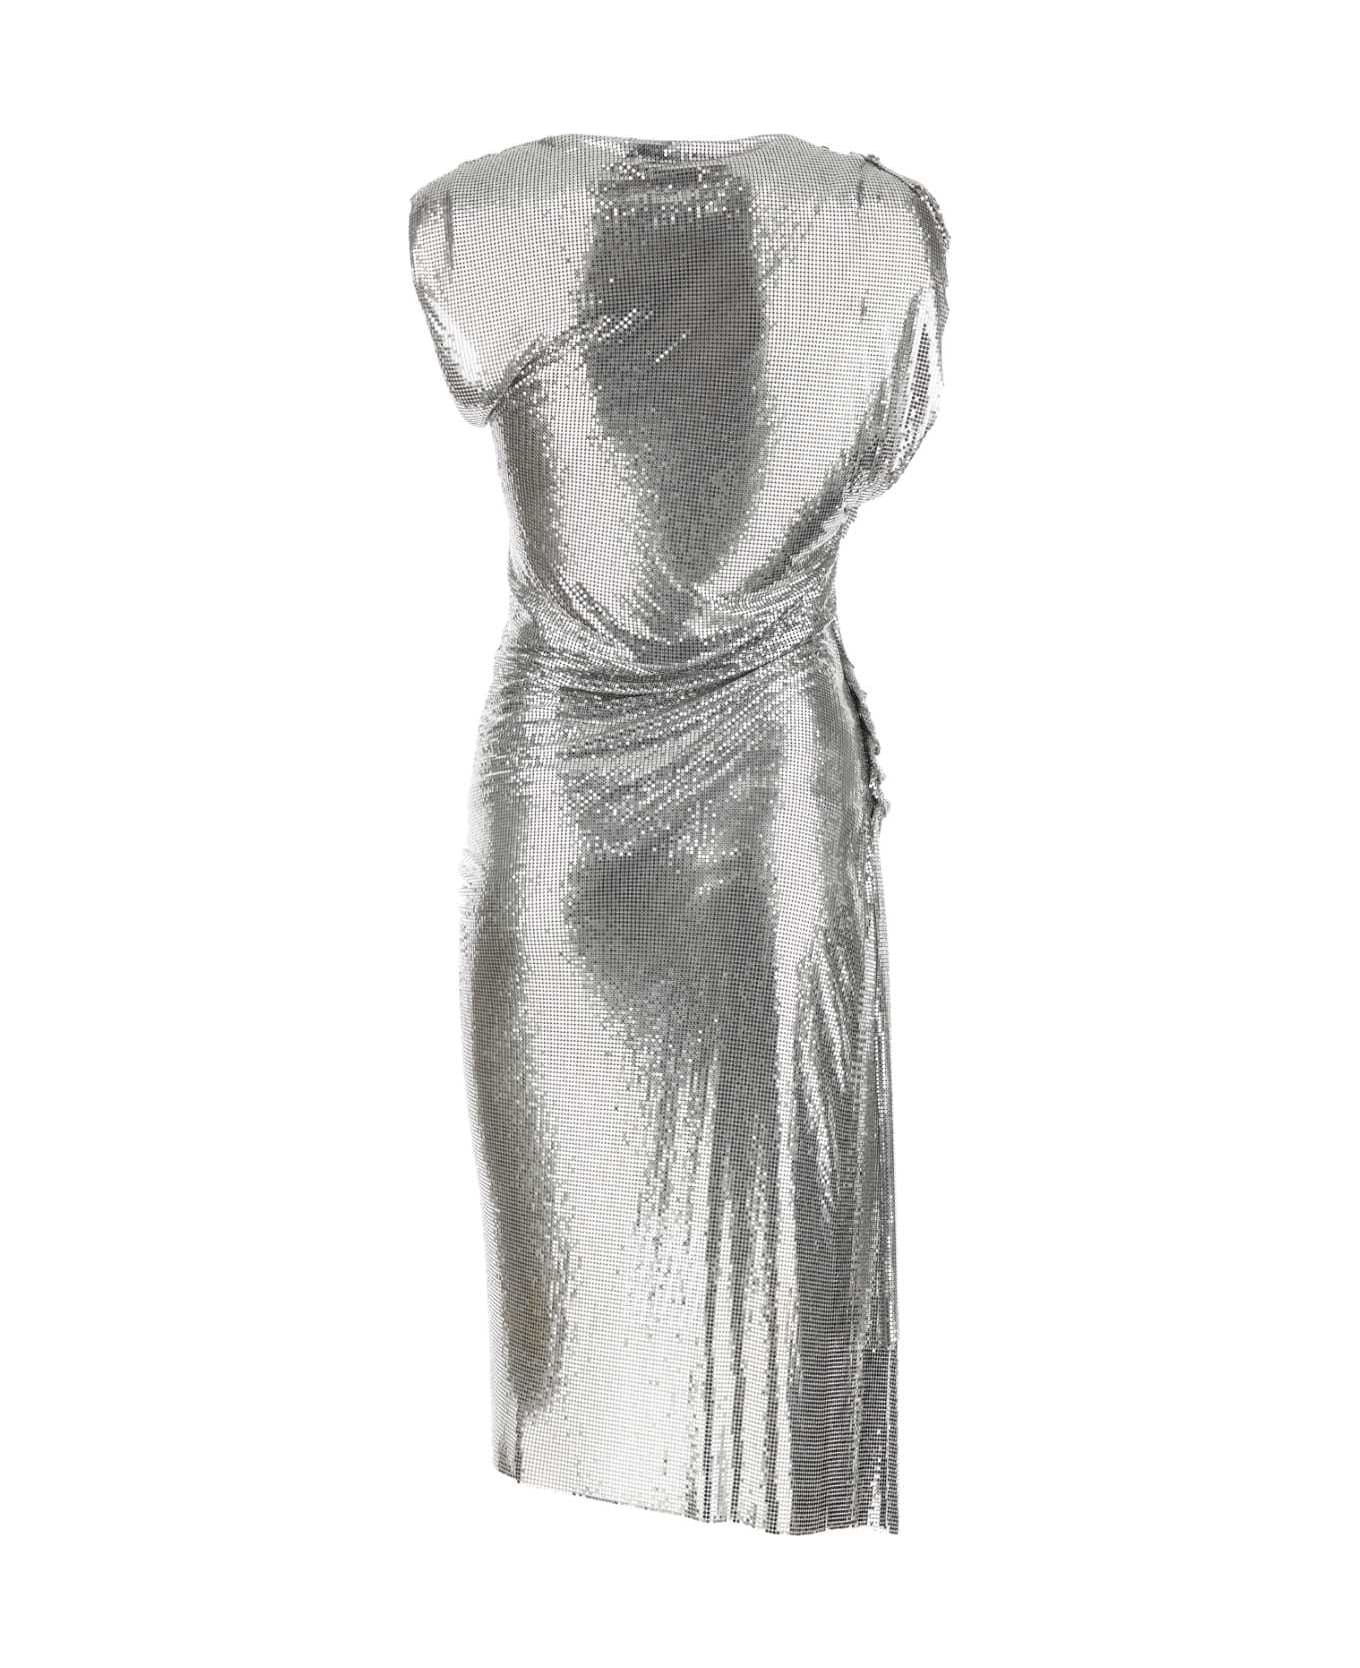 Paco Rabanne Silver Chainmail Dress - SILVER